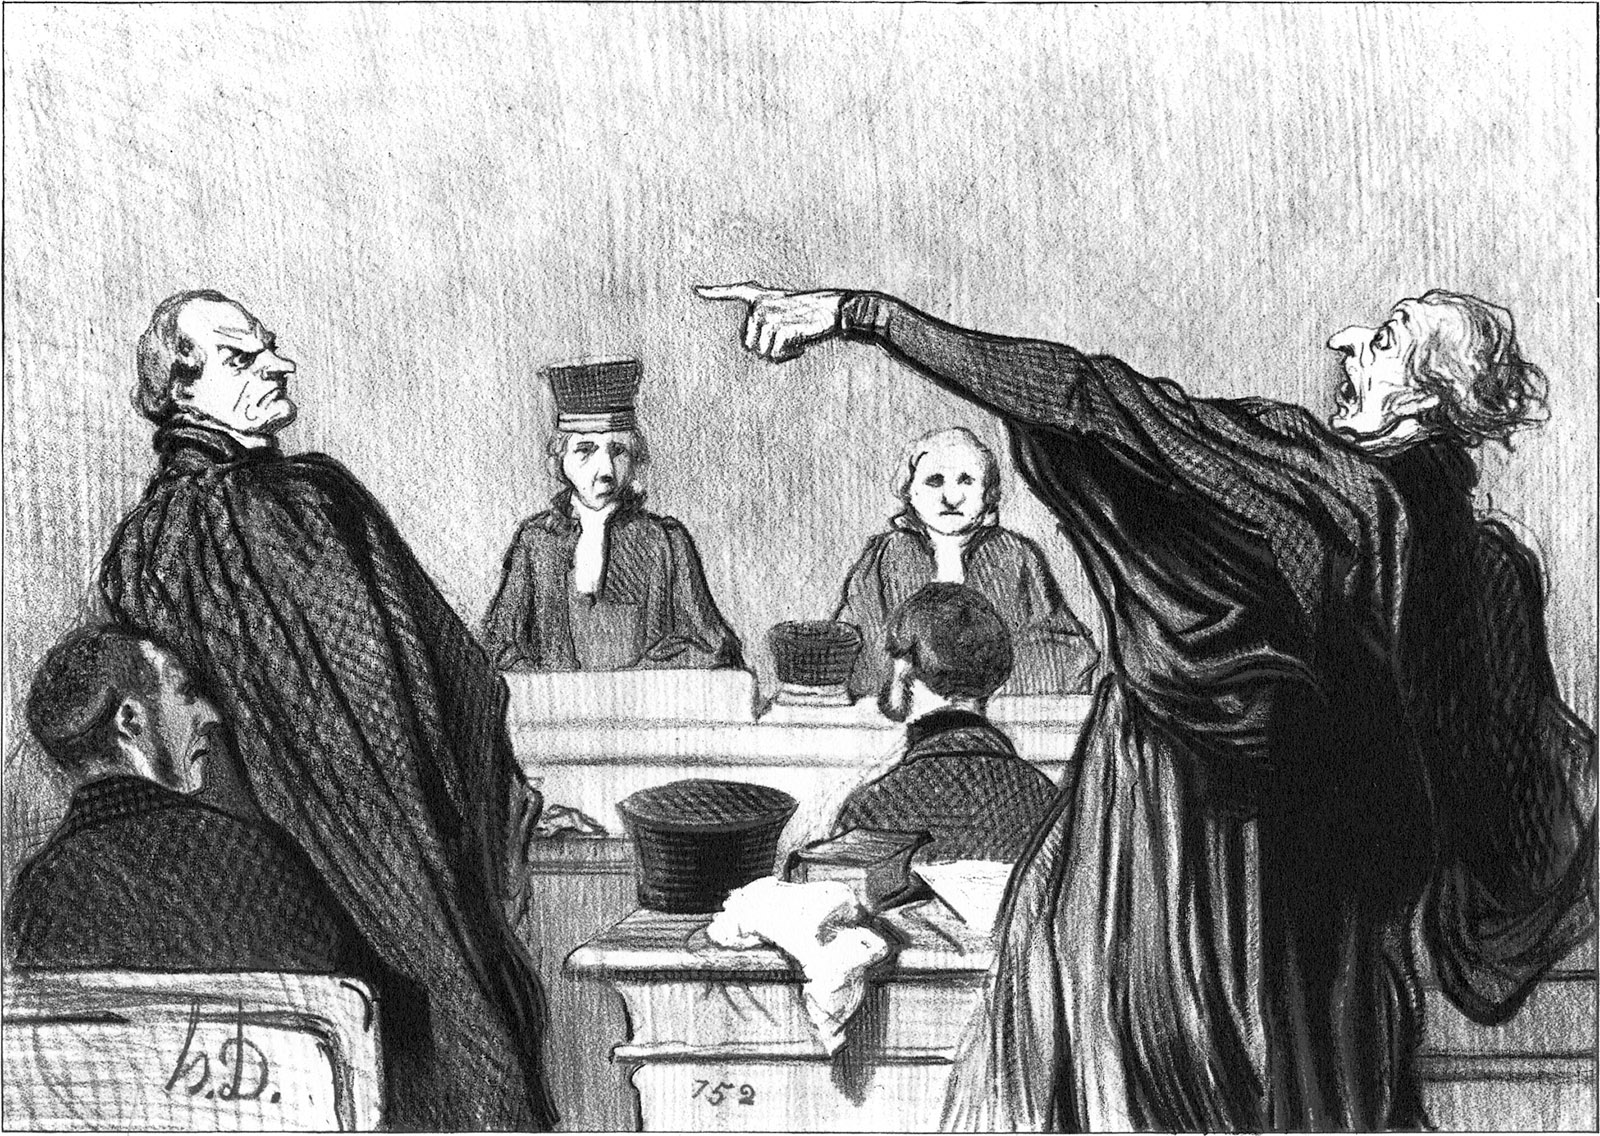 Drawing of a courtroom scene